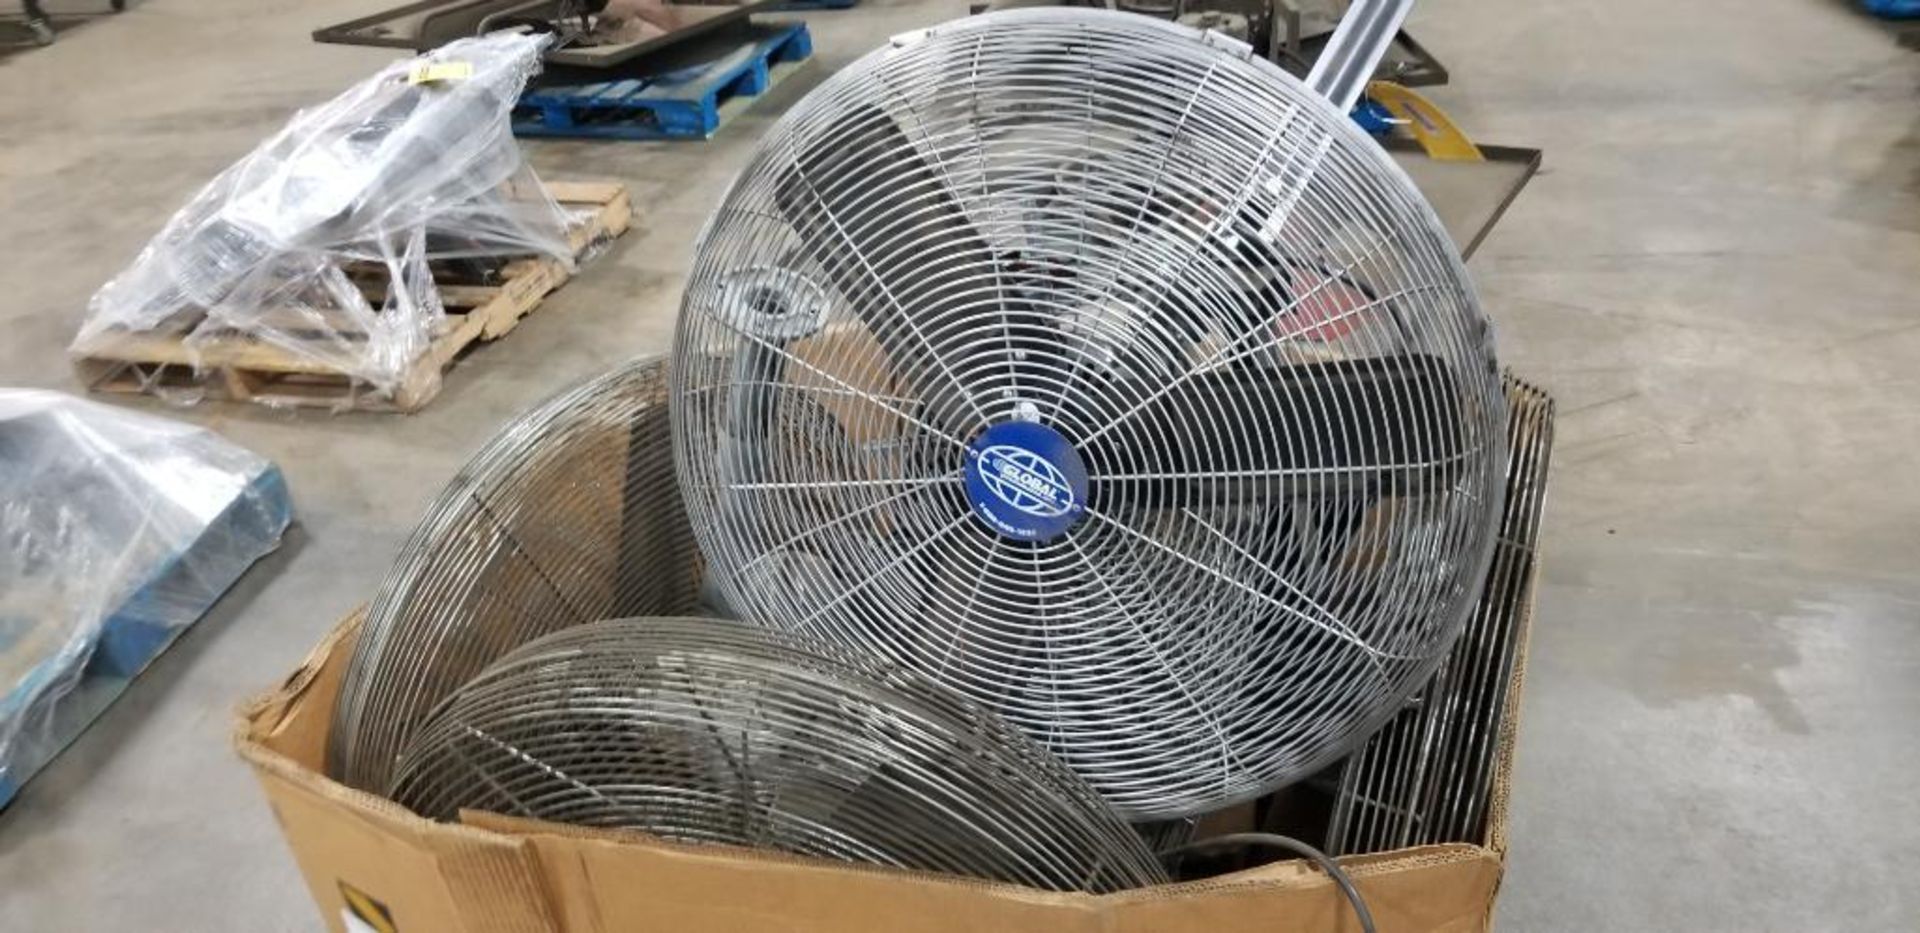 Skid of (6) Wall Mount Shop Fans ($50 Loading Fee Will be Added to Buyers Invoice) - Image 3 of 3